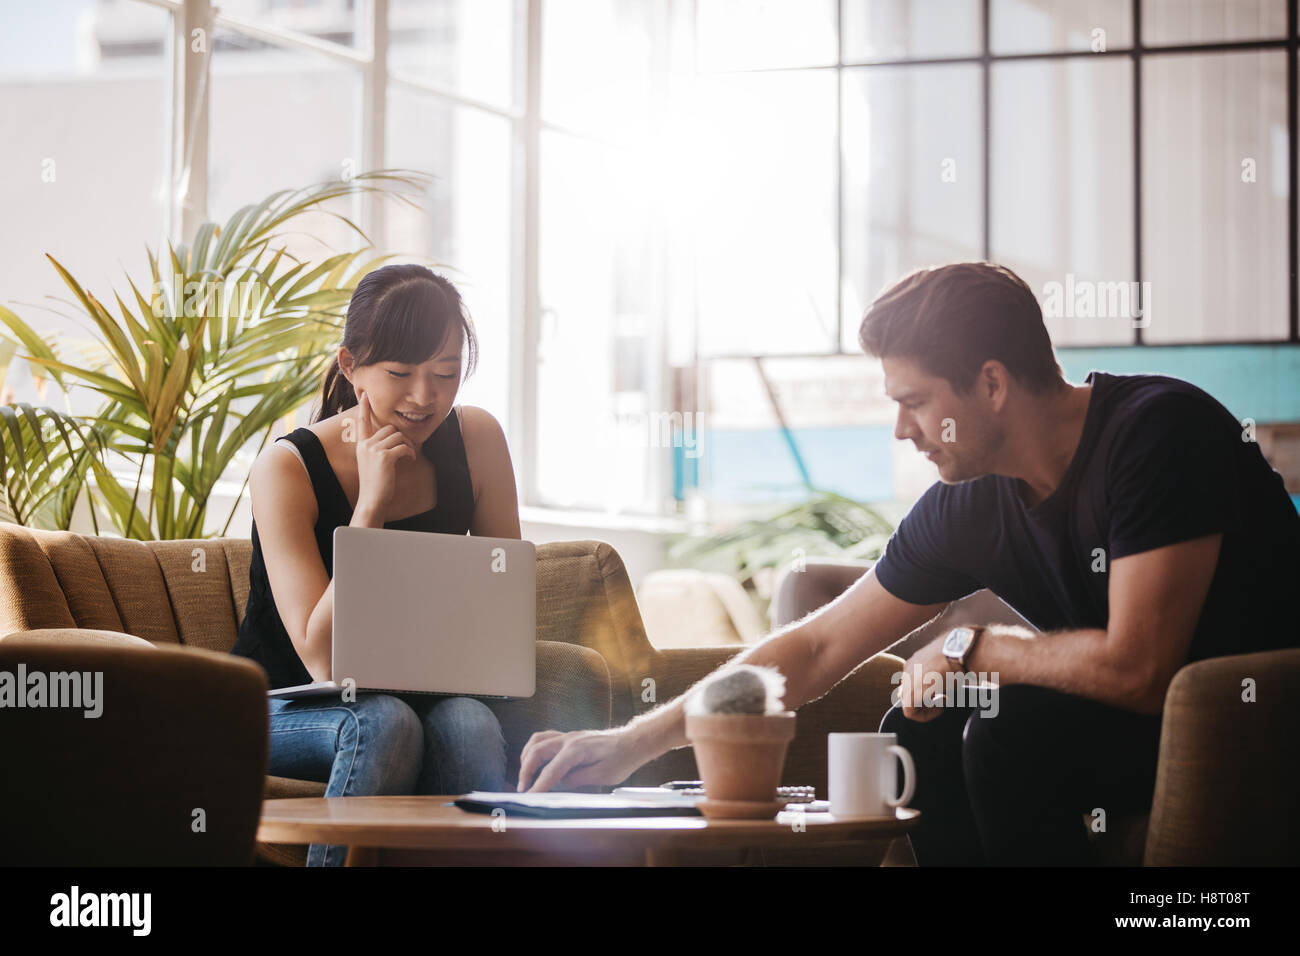 Shot of two people sitting in office lobby and working on laptop. Asian woman and caucasian man working together in modern offic Stock Photo